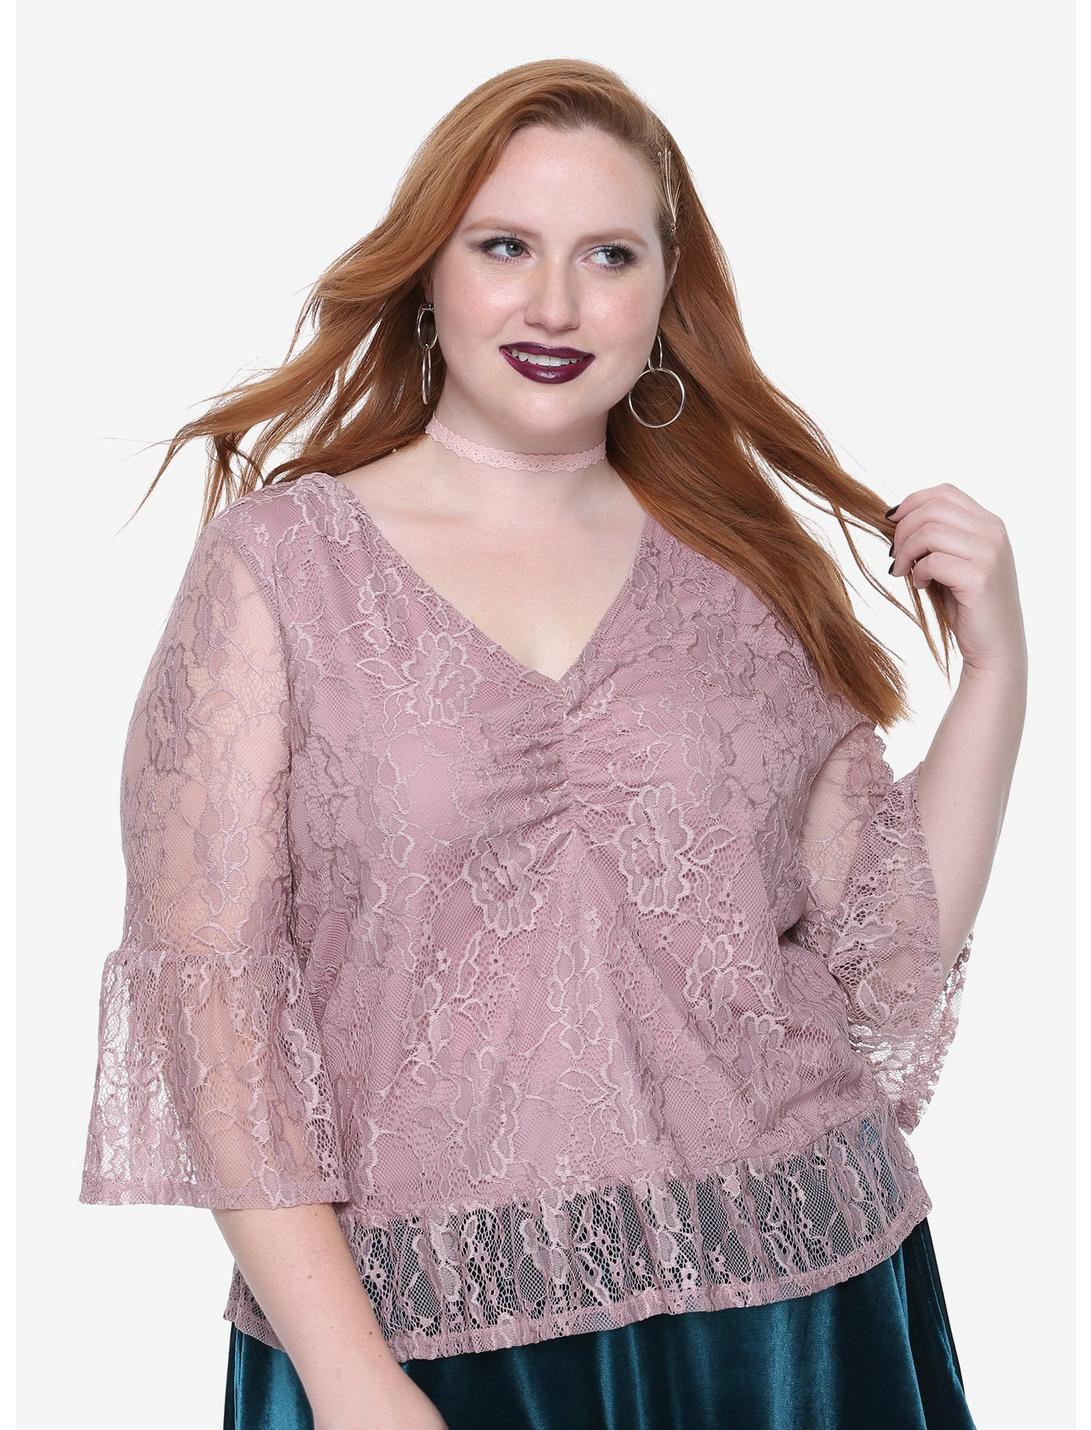 Blush Lace V-Neck Bell Sleeve Girls Top Plus Size, PURPLE, hi-res